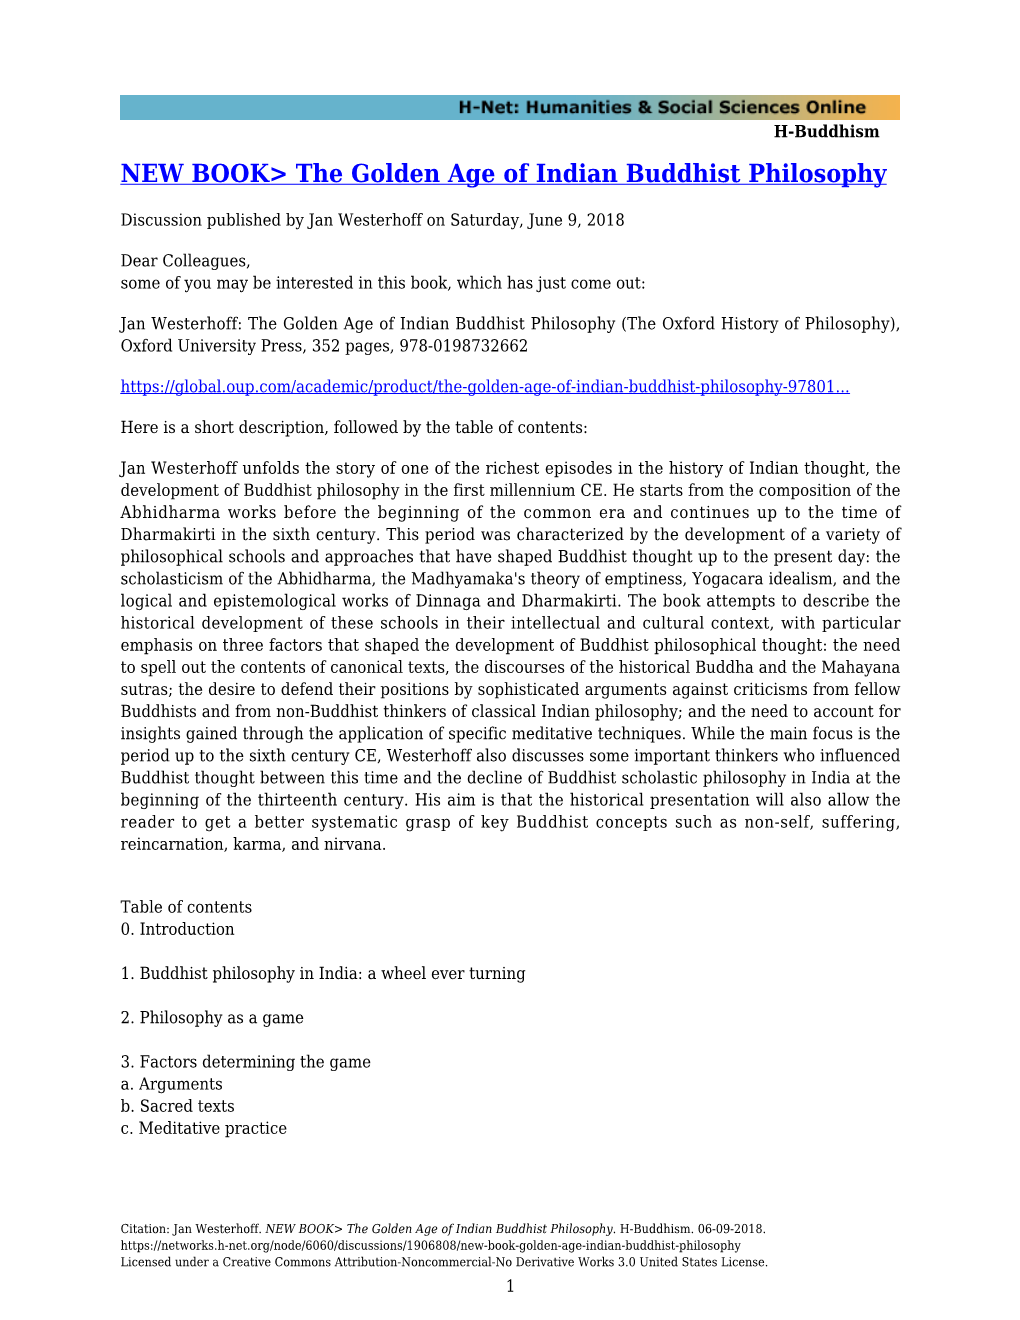 NEW BOOK&gt; the Golden Age of Indian Buddhist Philosophy